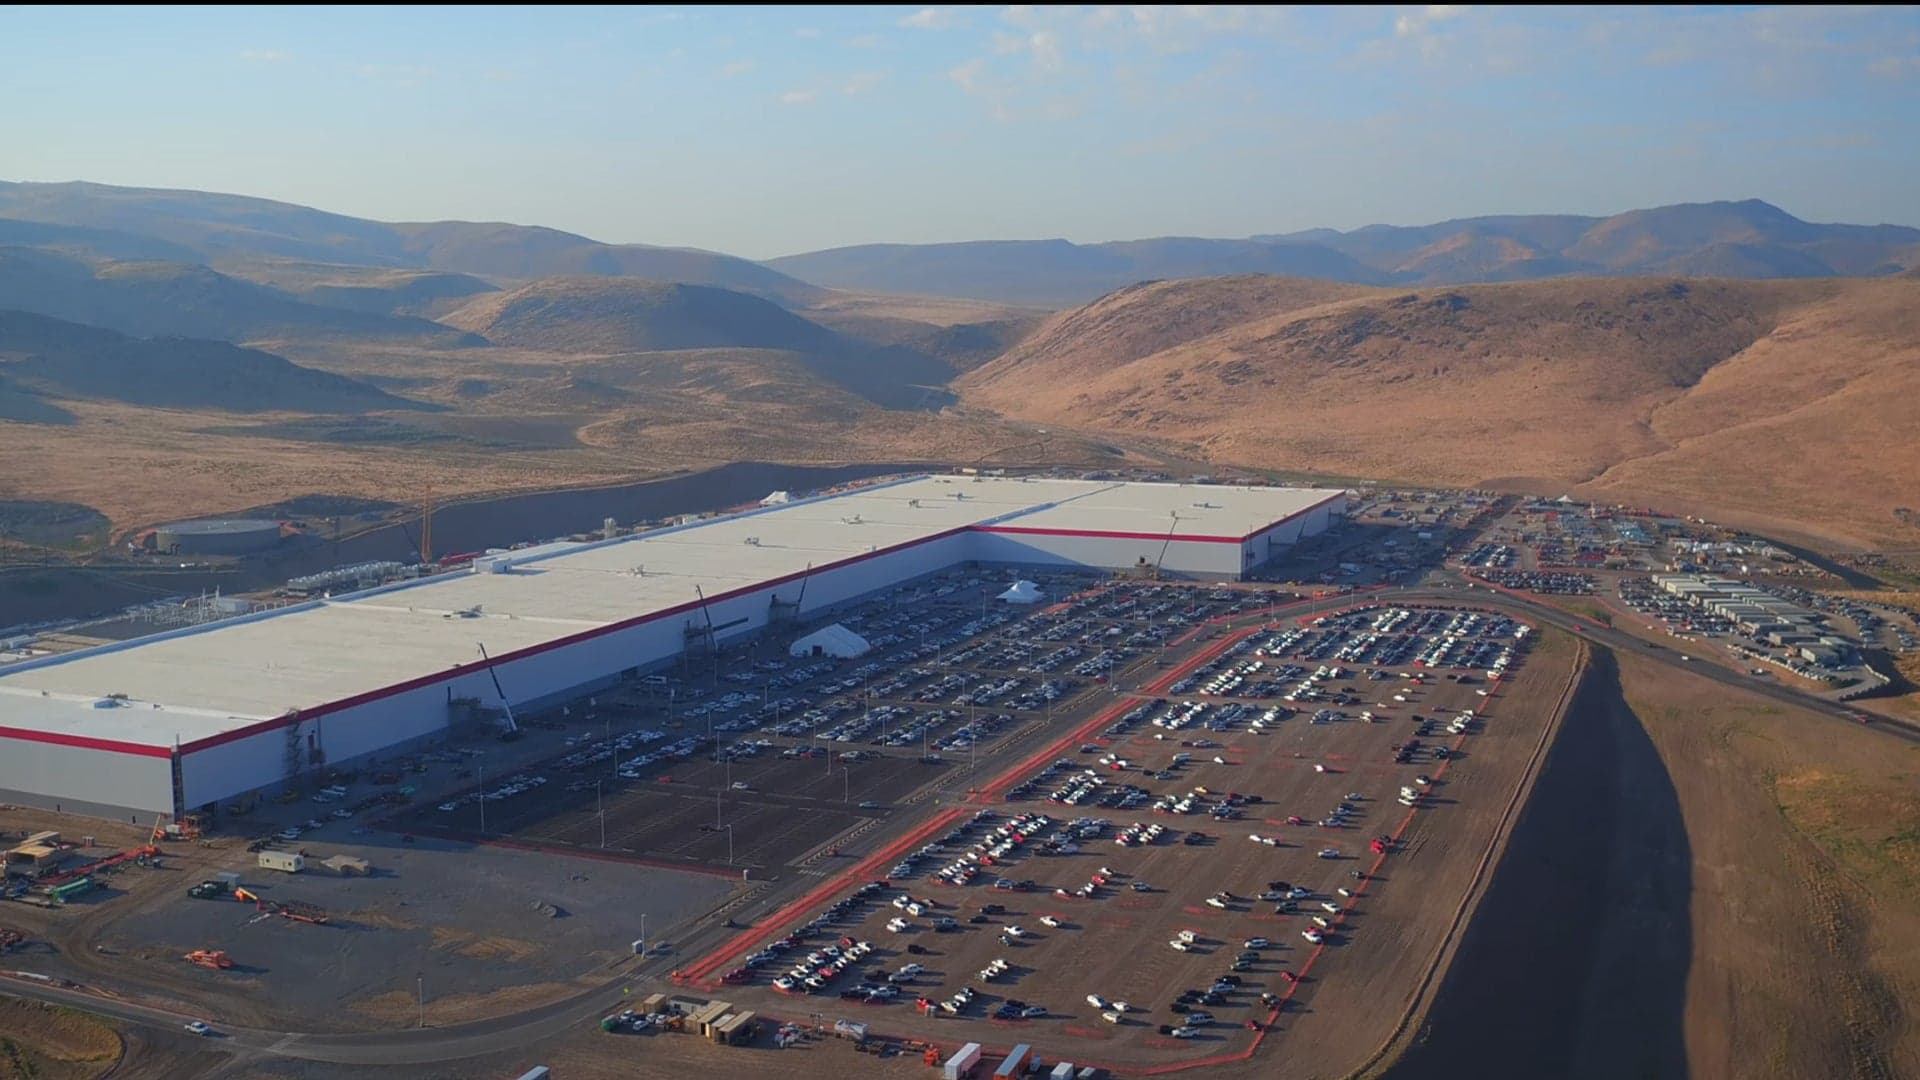 New Tesla Complaint Alleges Employee Drug Trafficking and Theft at Gigafactory